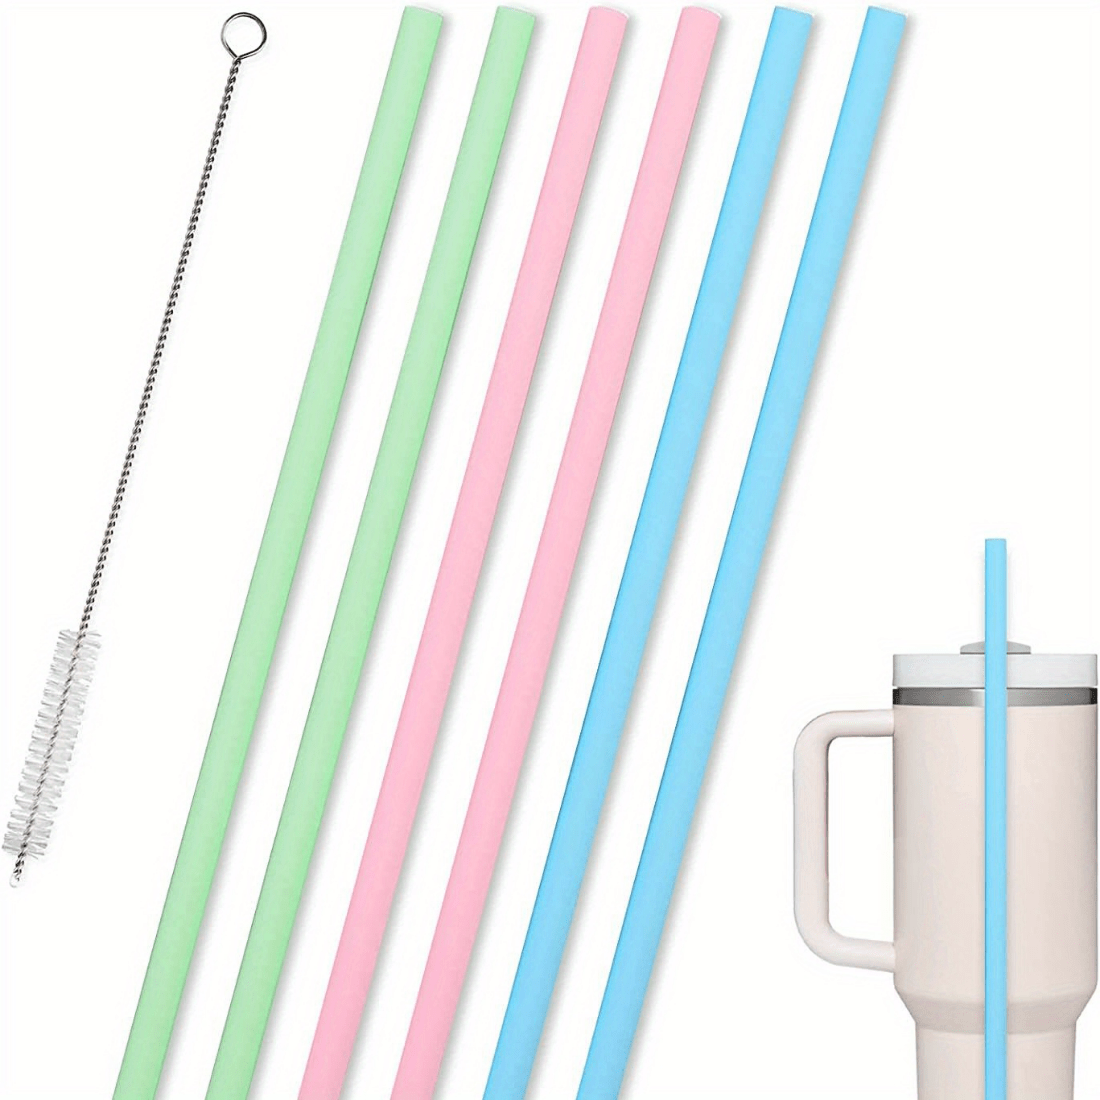 6pcs Straw Replacement for Stanley Cup Accessories, Reusable